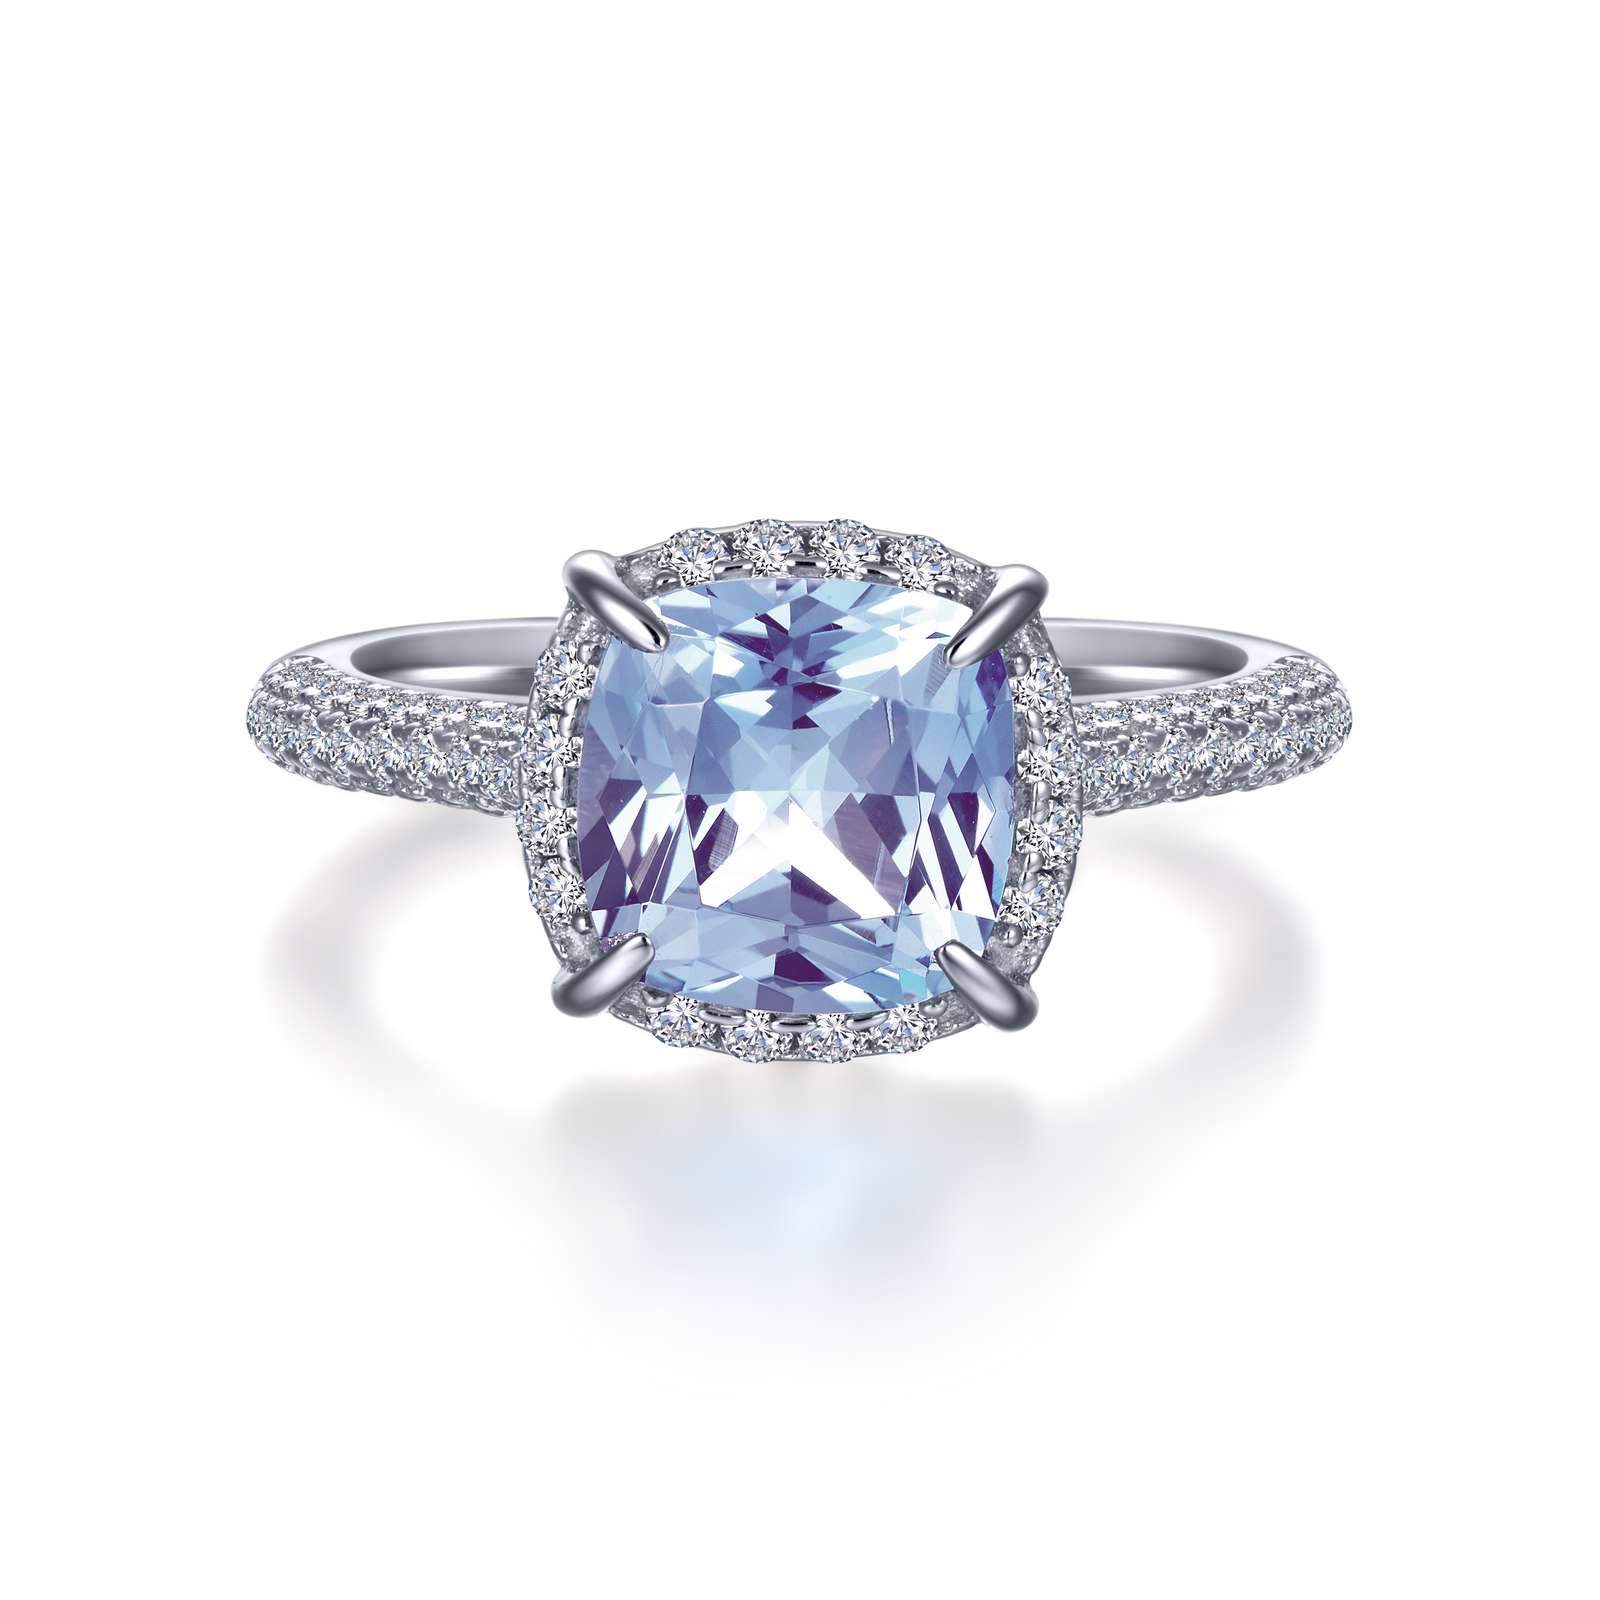 Classic Simulated Diamond And Aquamarine Platinum Bonded Ring Griner Jewelry Co. Moultrie, GA